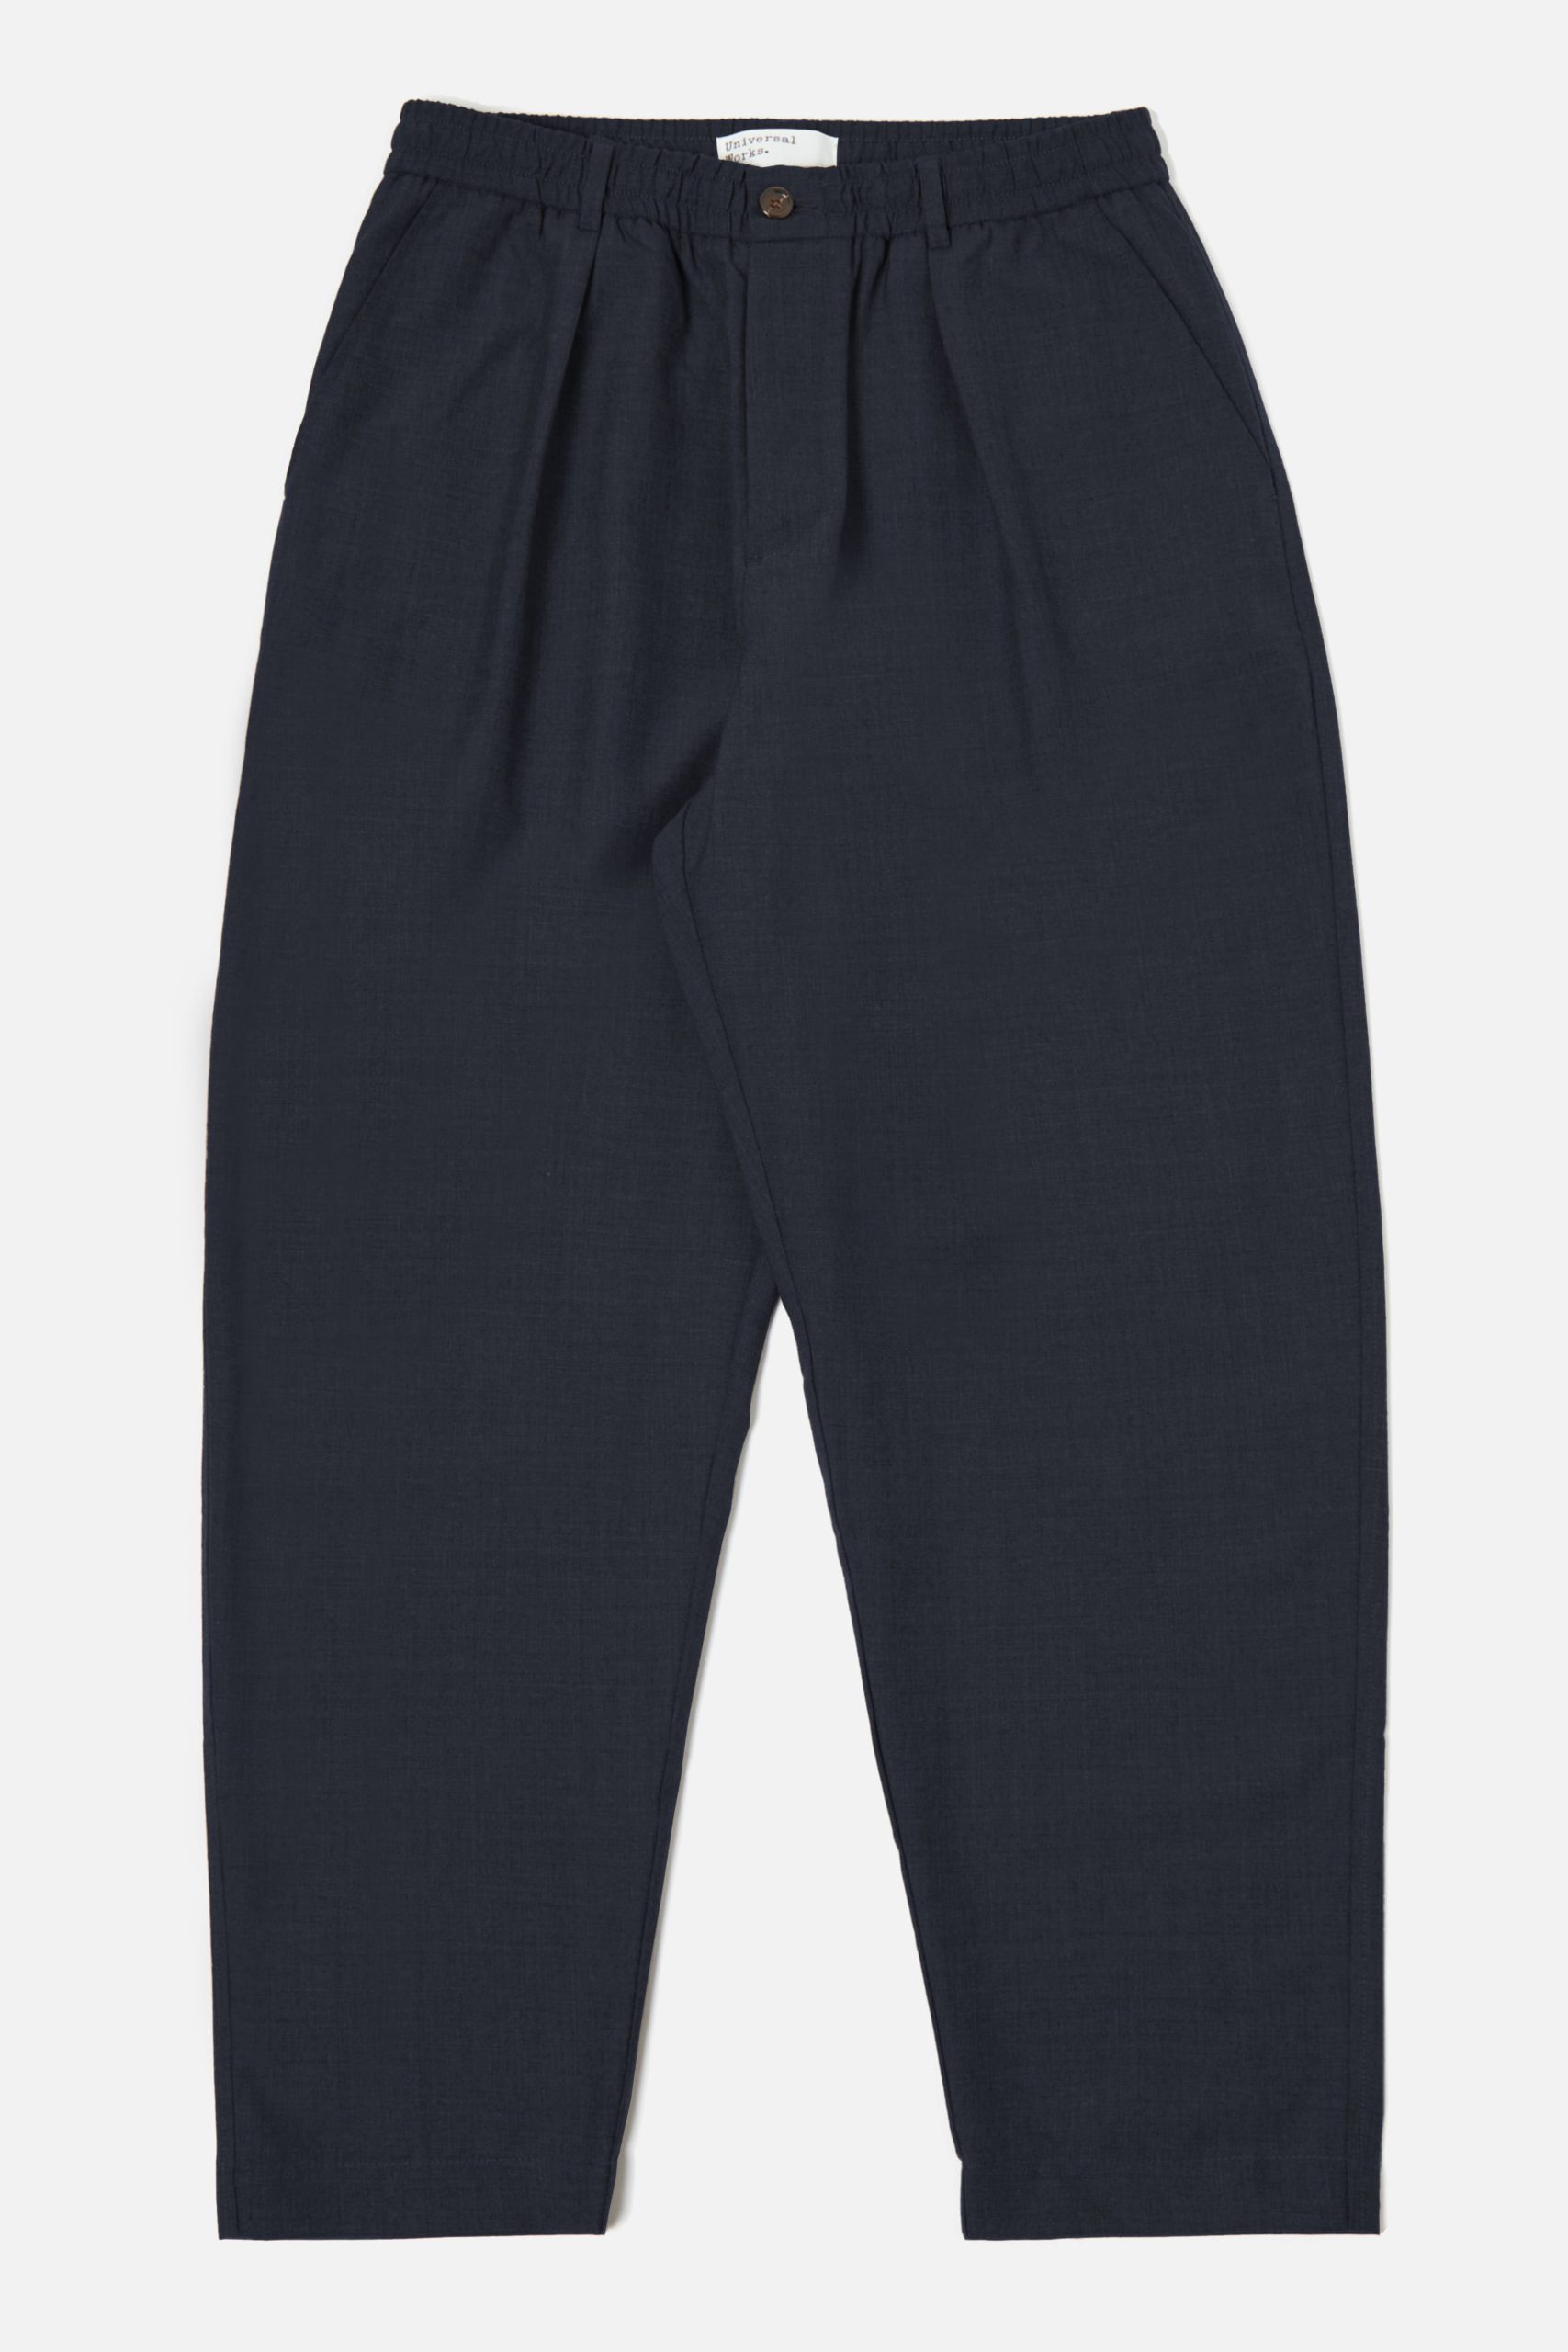 UNIVERSAL WORKS Pleated Track Pant In Navy Marl Tropical Suiting